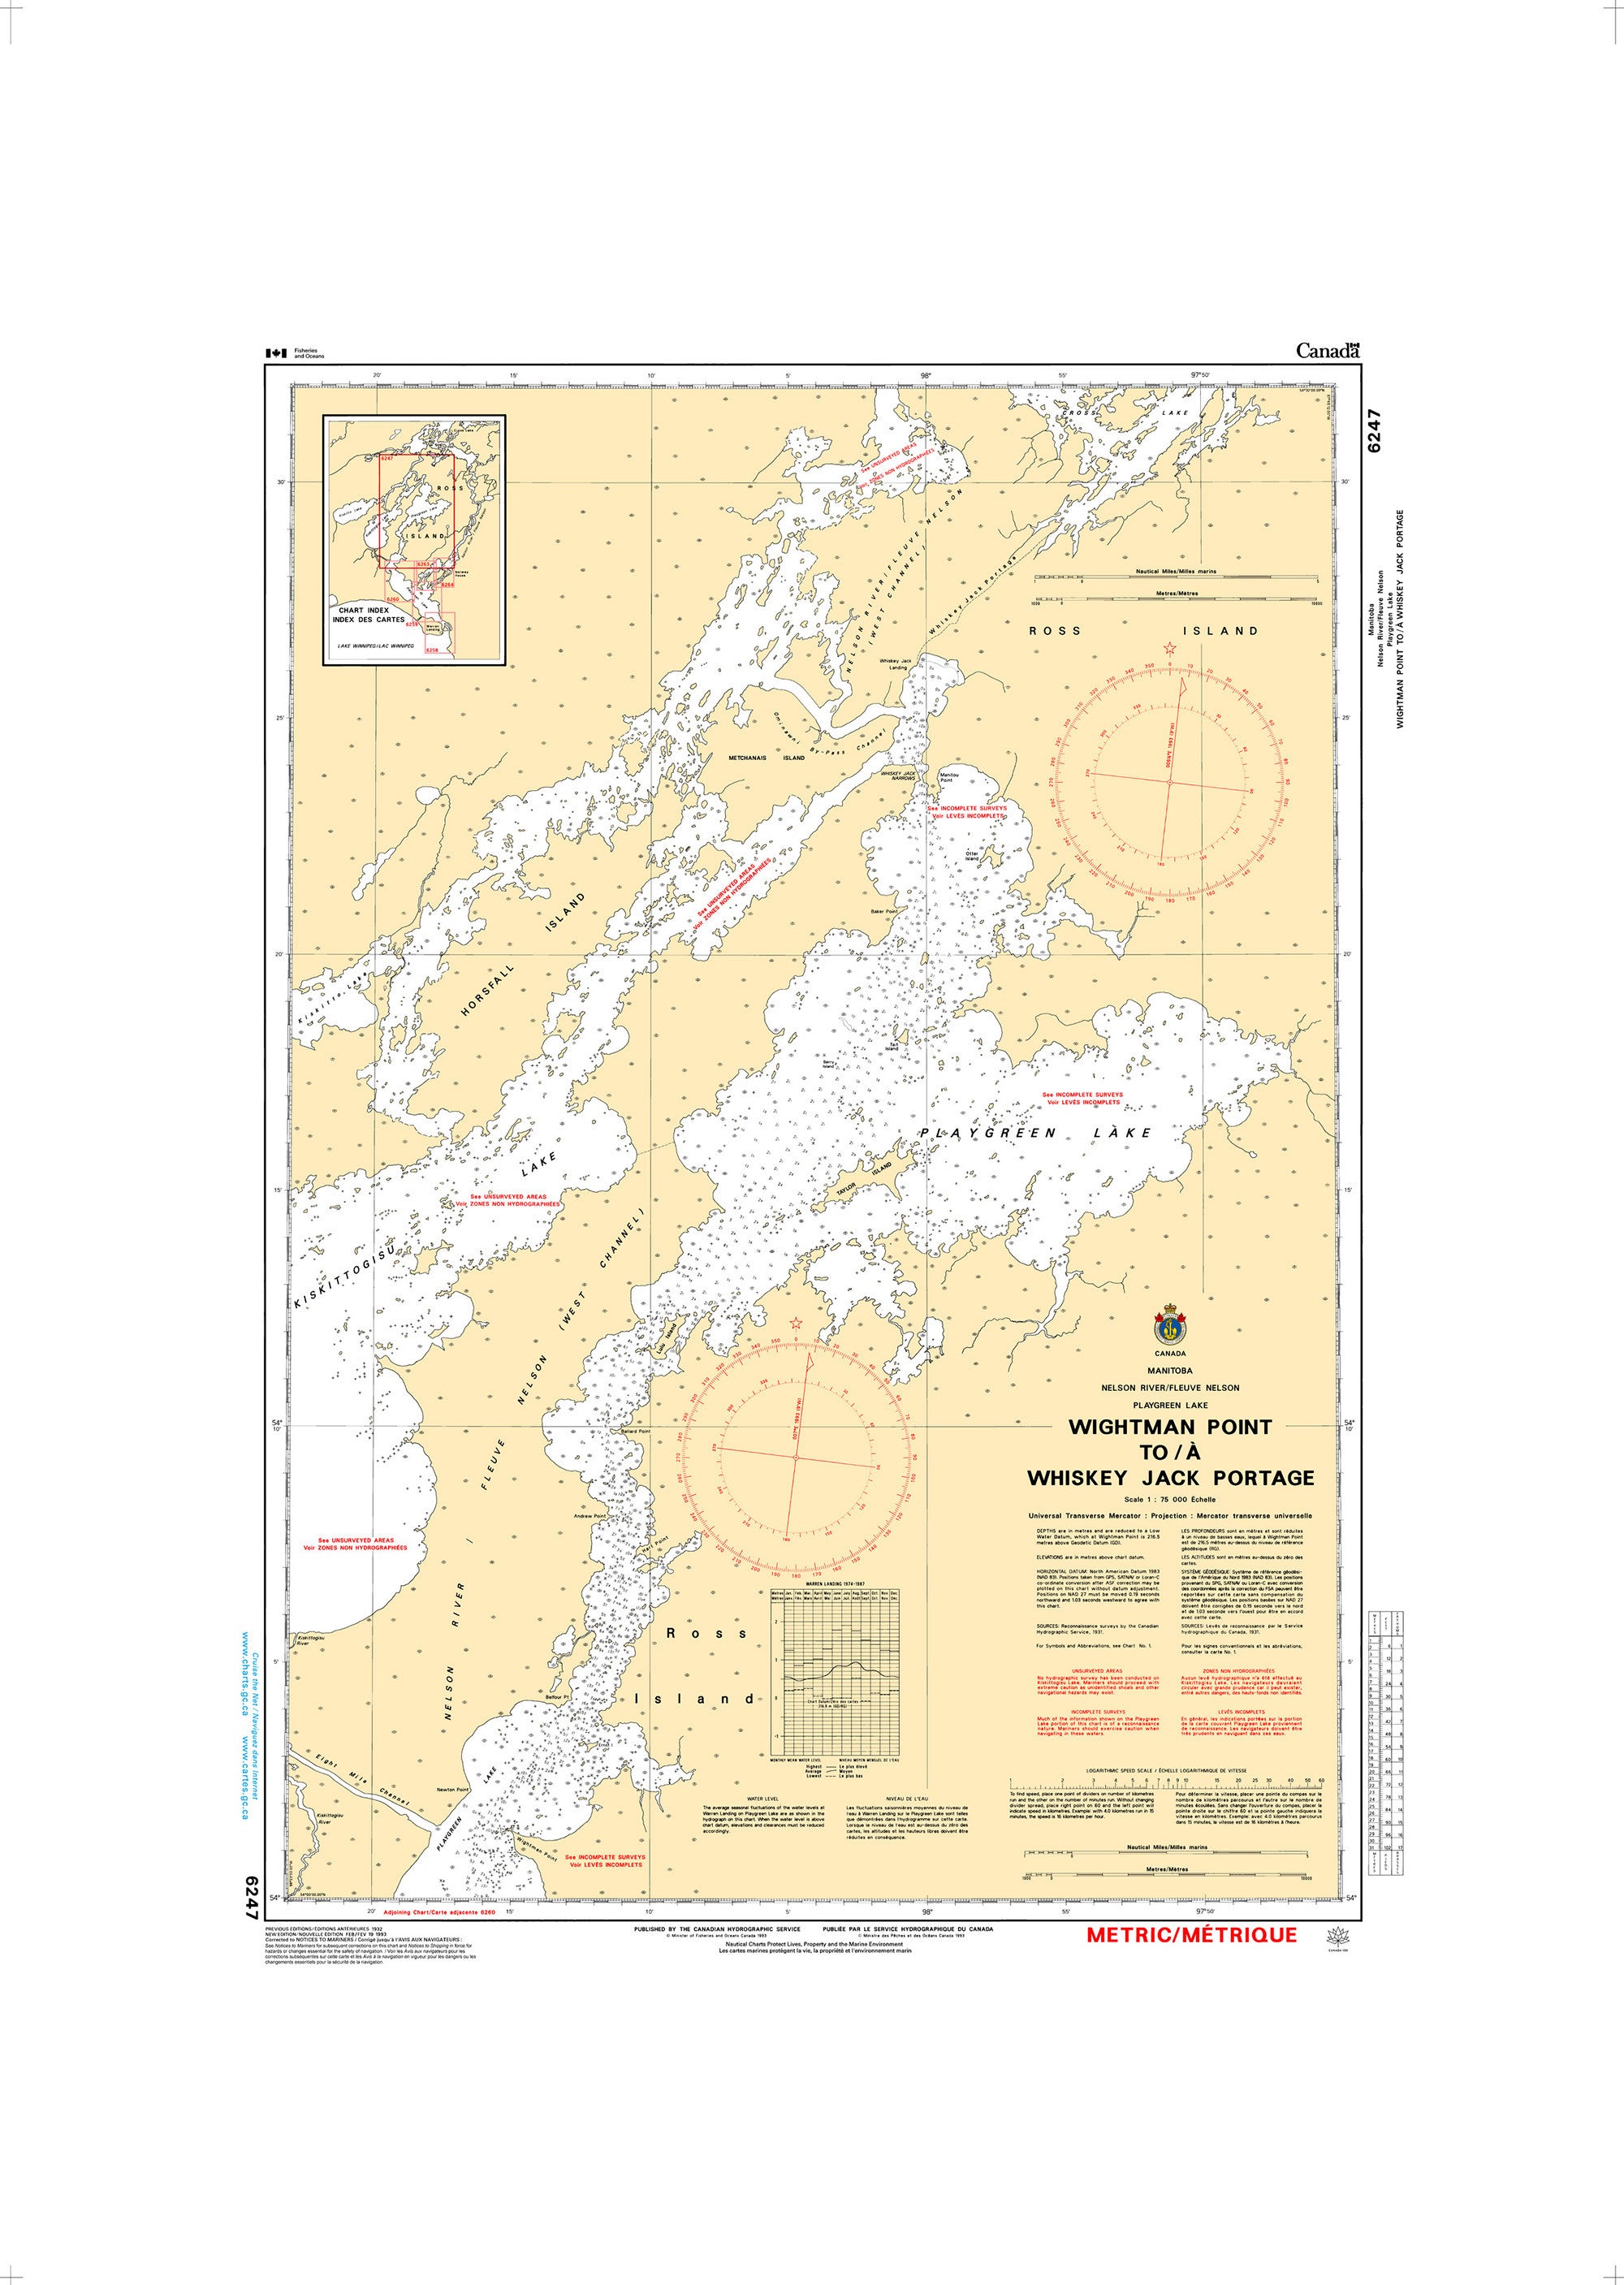 Canadian Hydrographic Service Nautical Chart CHS6247: Wightman Point to/à Whiskey Jack Portage